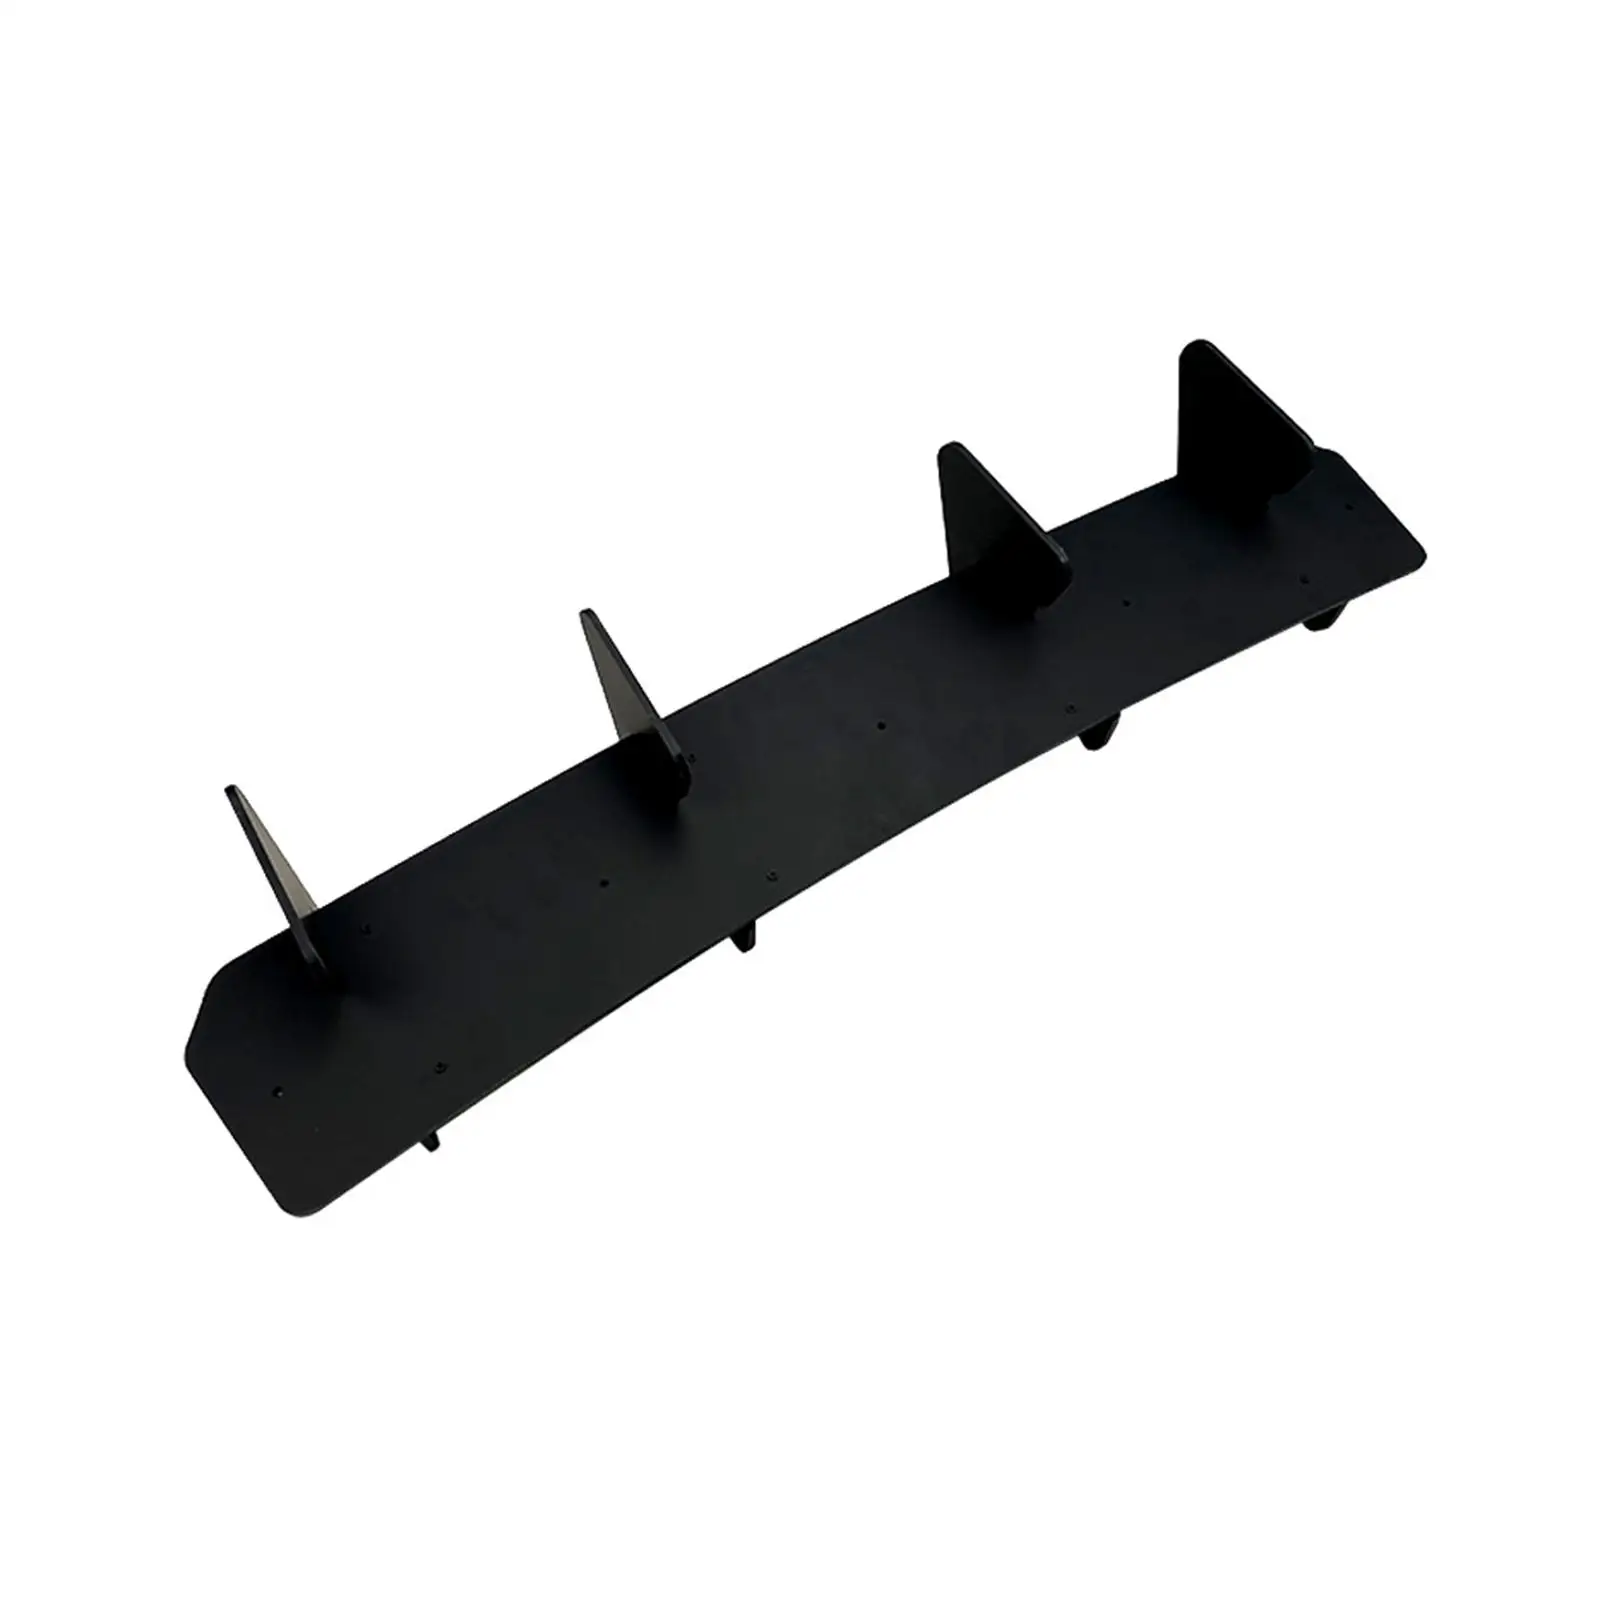 Automotive Car Rear Bumper Diffuser with Side splitters for VW Golf MK7.5 GTI Black Color Accessory Lightweight Durable